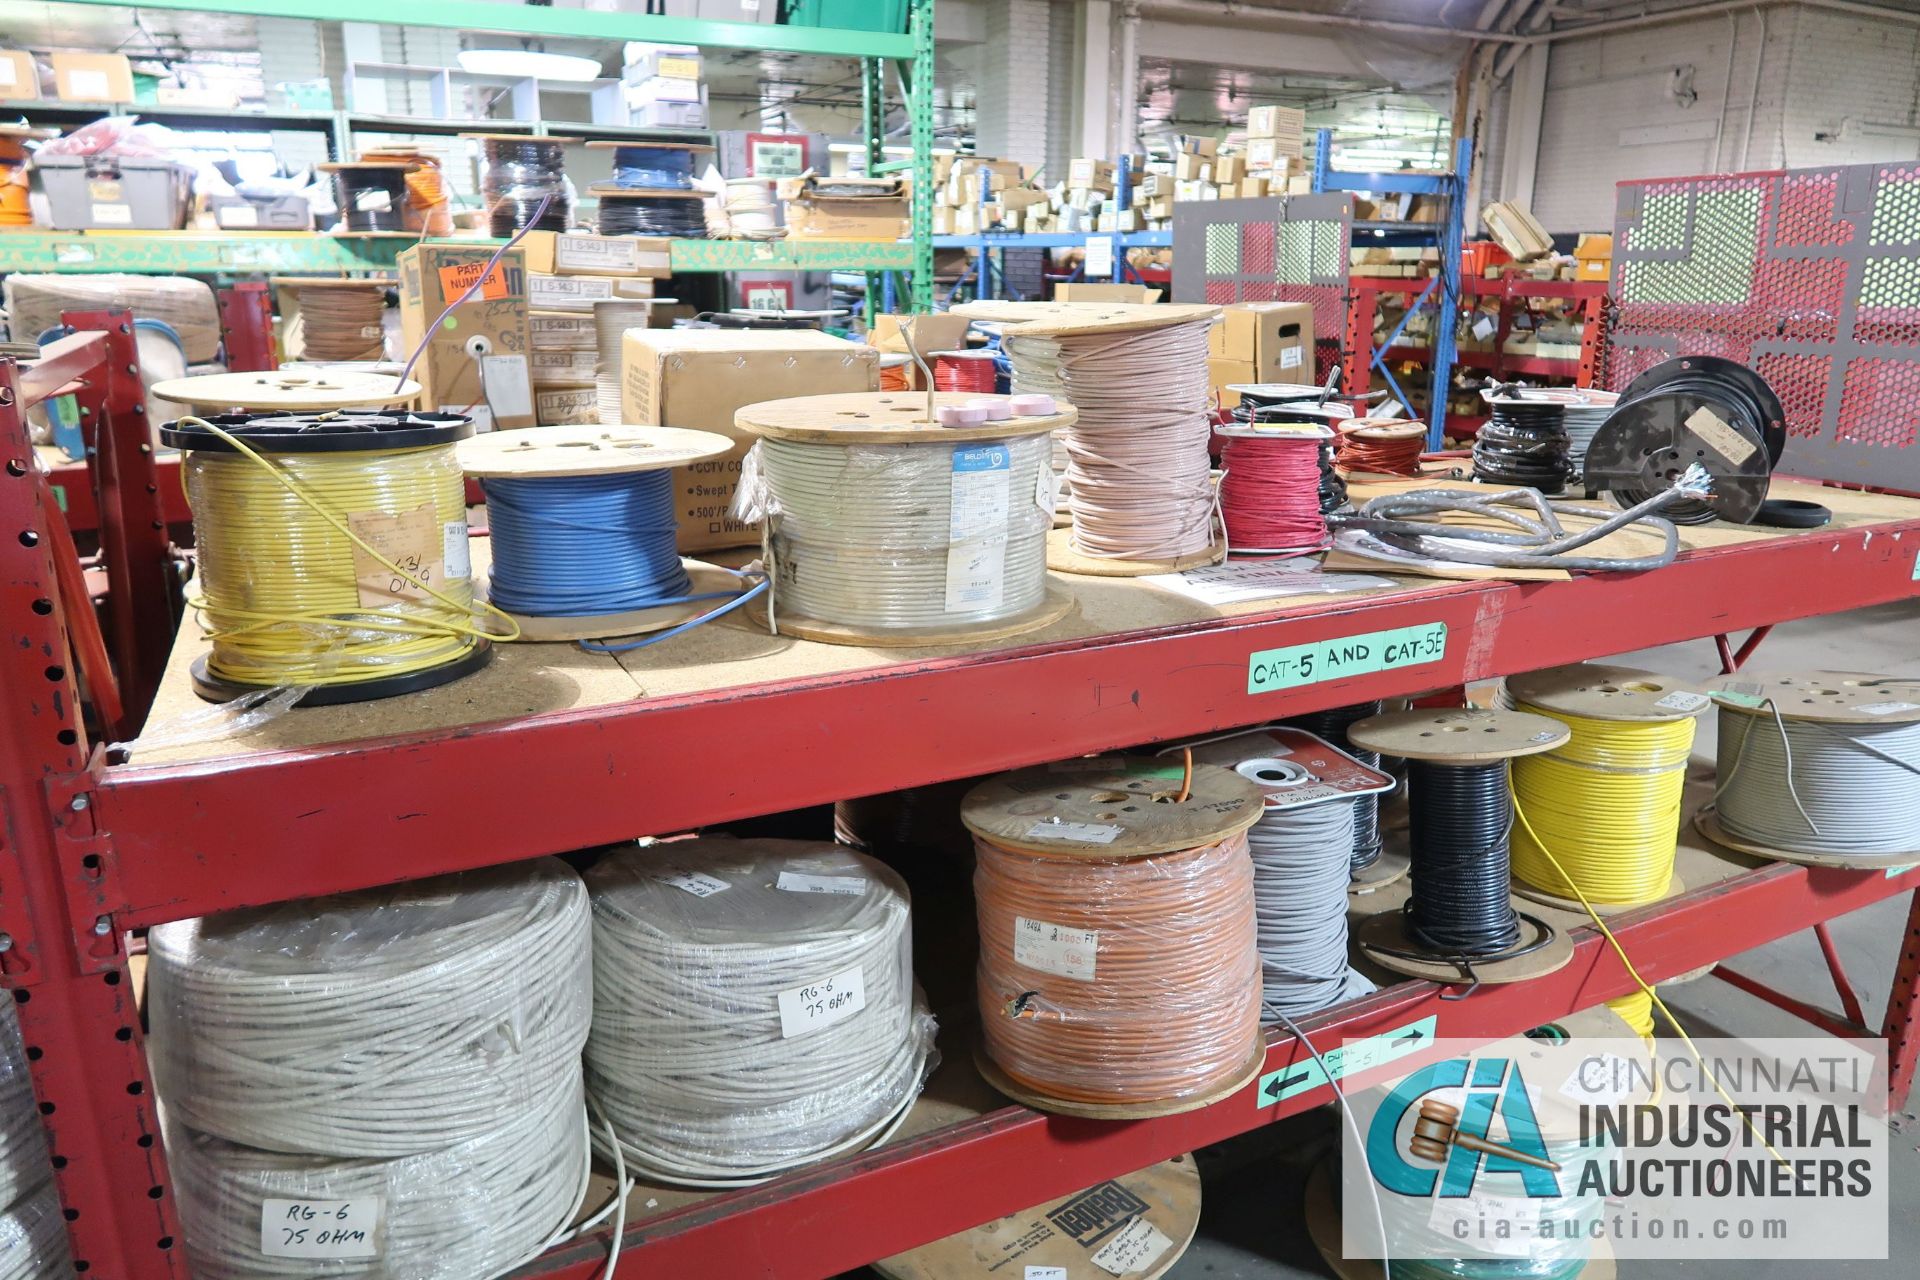 (LOT) LARGE QUANTITY OF COAX CABLE ON (3) SECTIONS RED RACK - APPROX. (130) SPOOLS - SOLD BY THE - Image 10 of 14